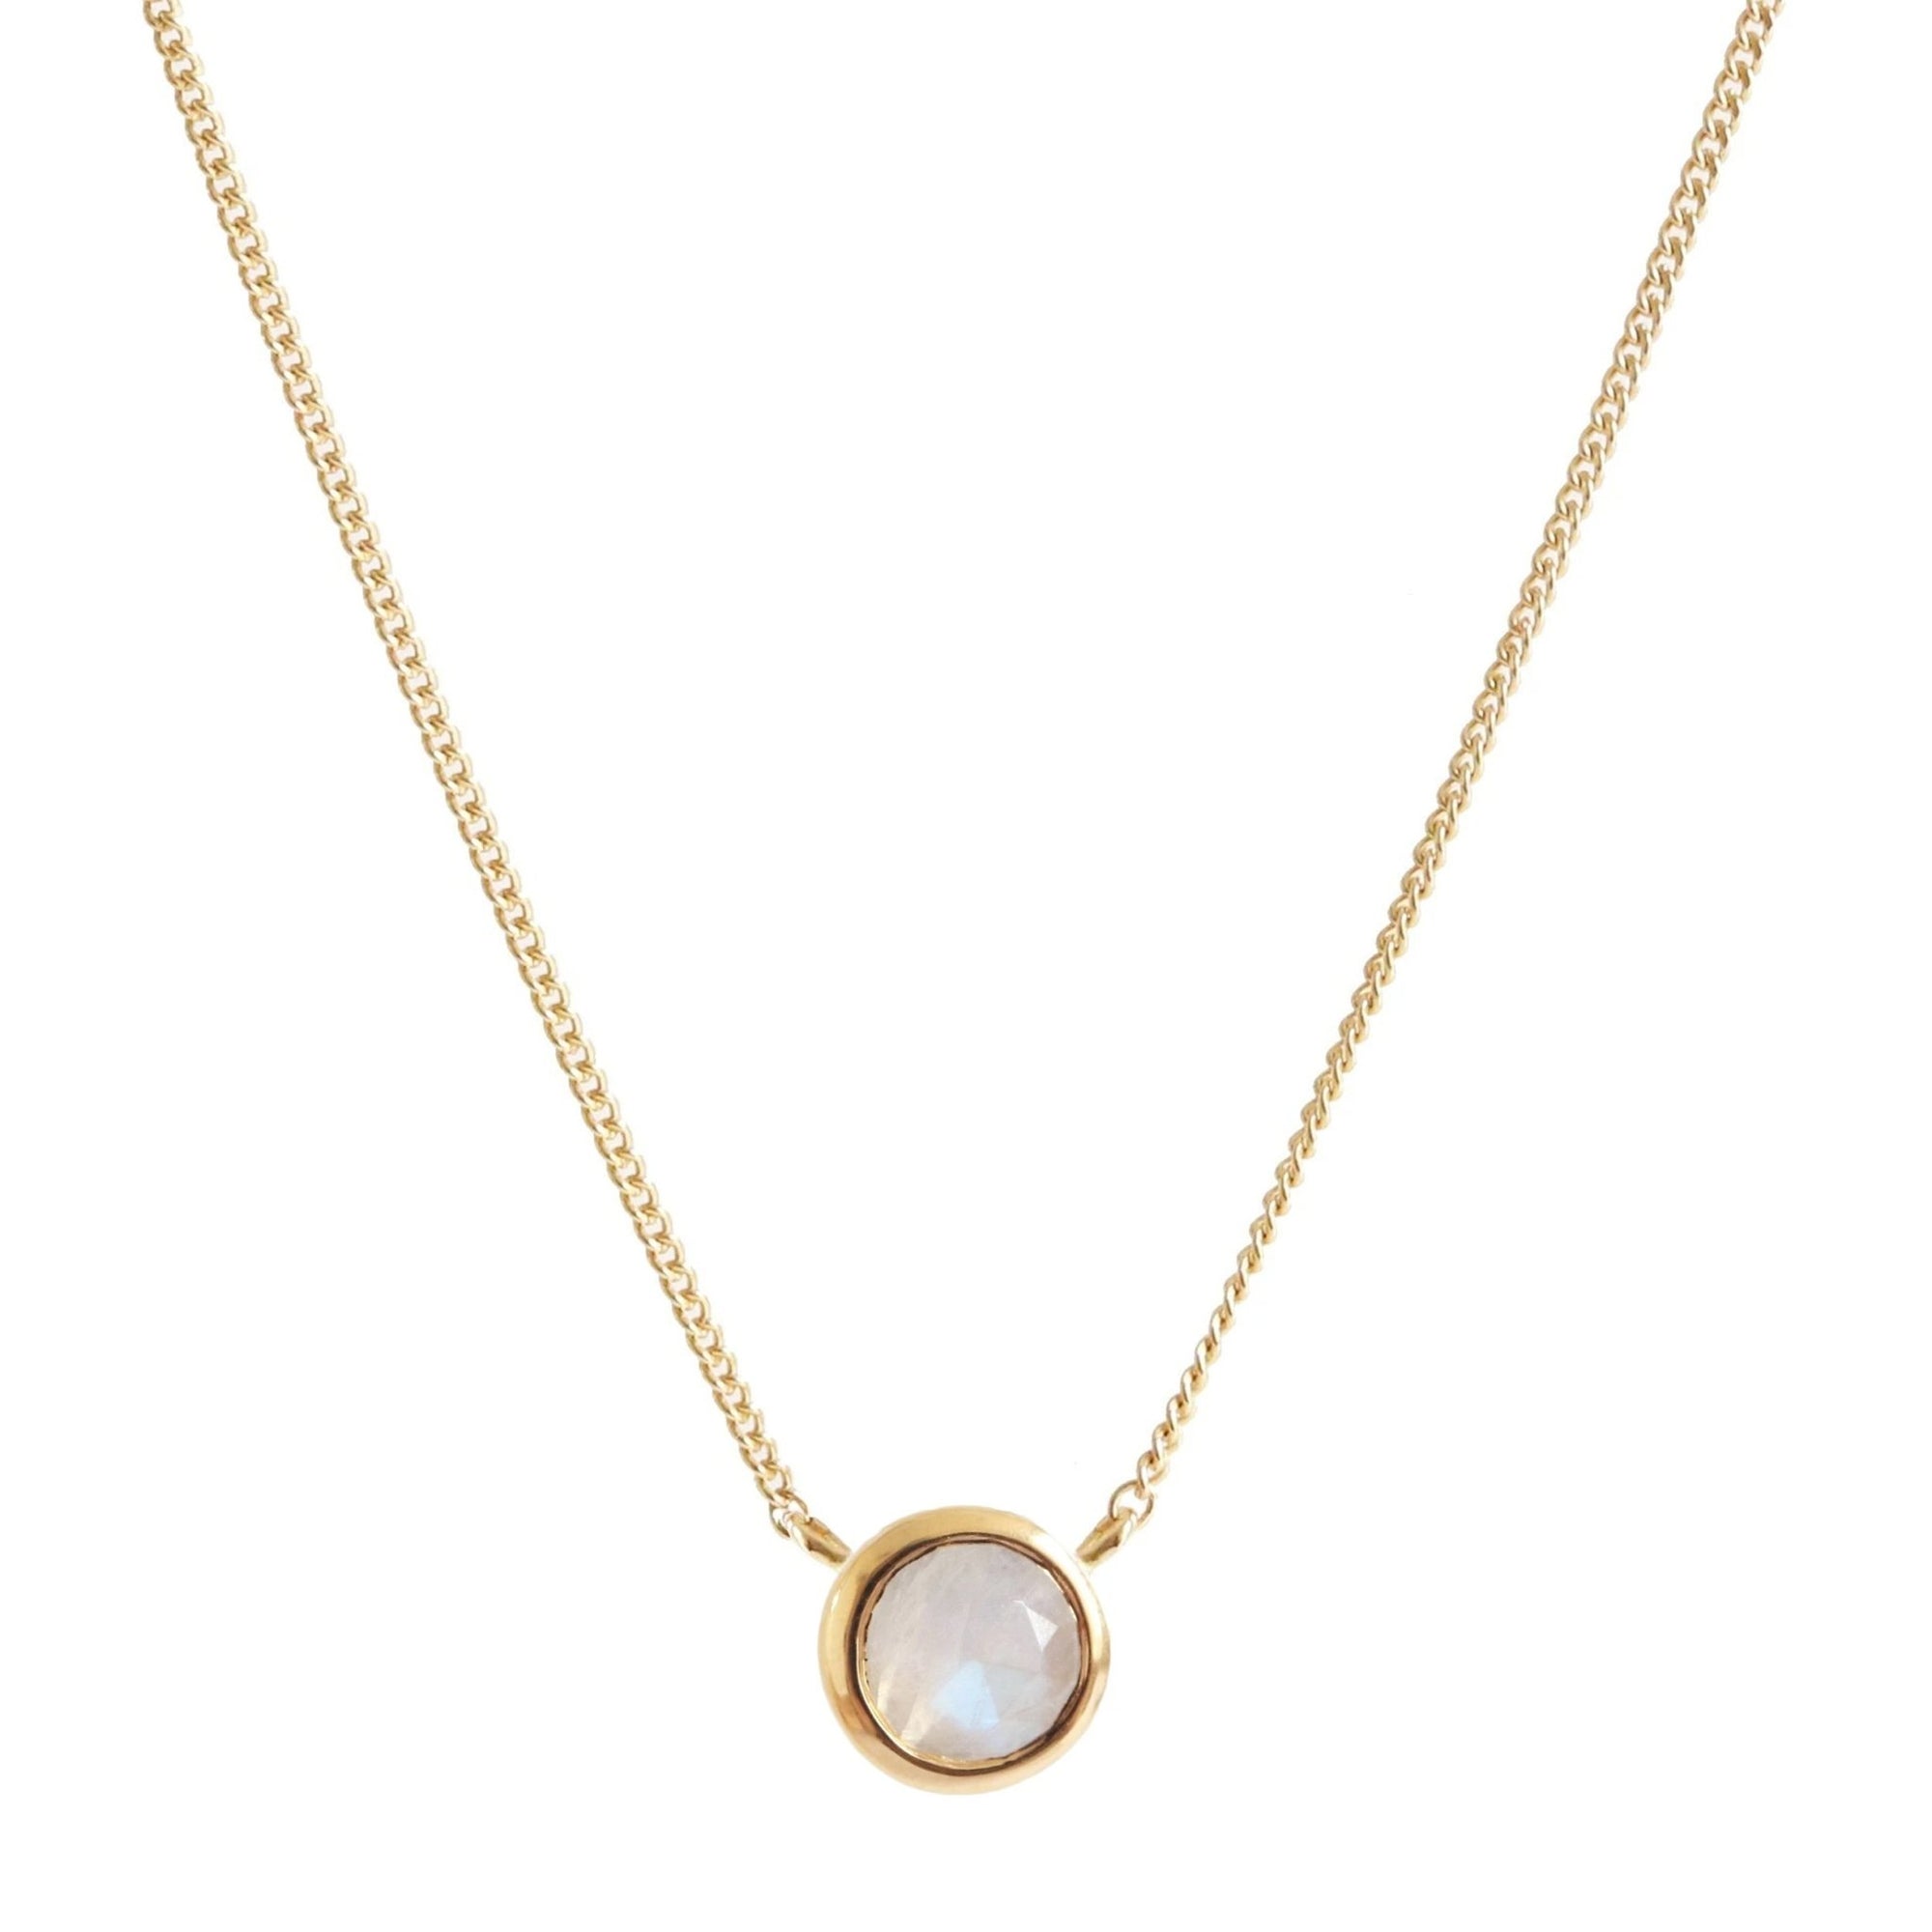 DAINTY LEGACY NECKLACE - RAINBOW MOONSTONE & GOLD - SO PRETTY CARA COTTER